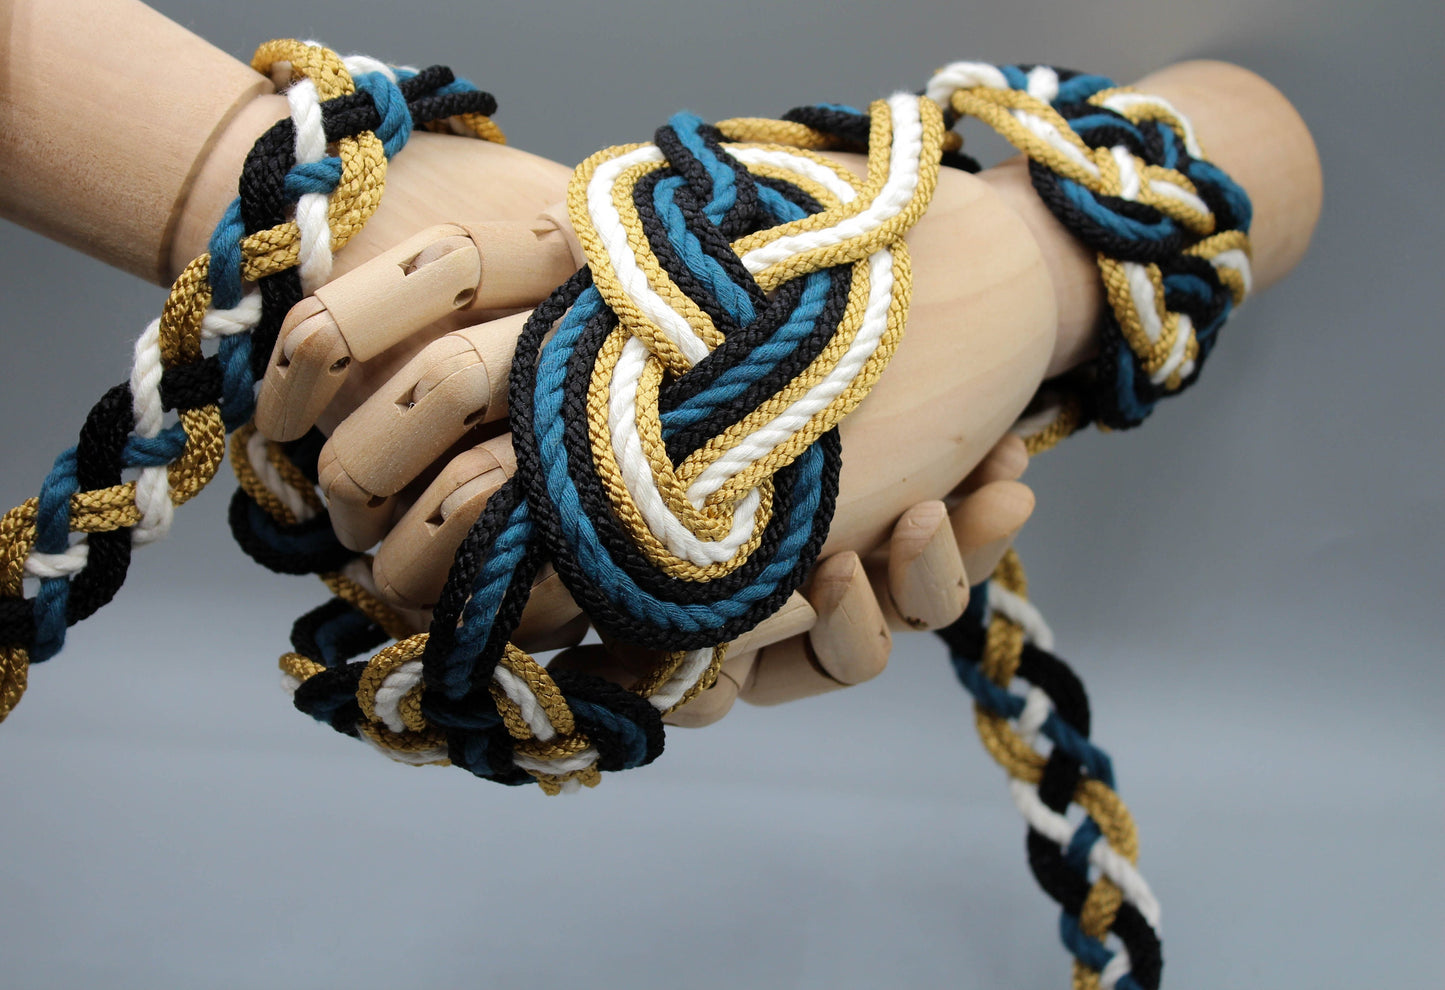 Nine Knot - Teal and Gold